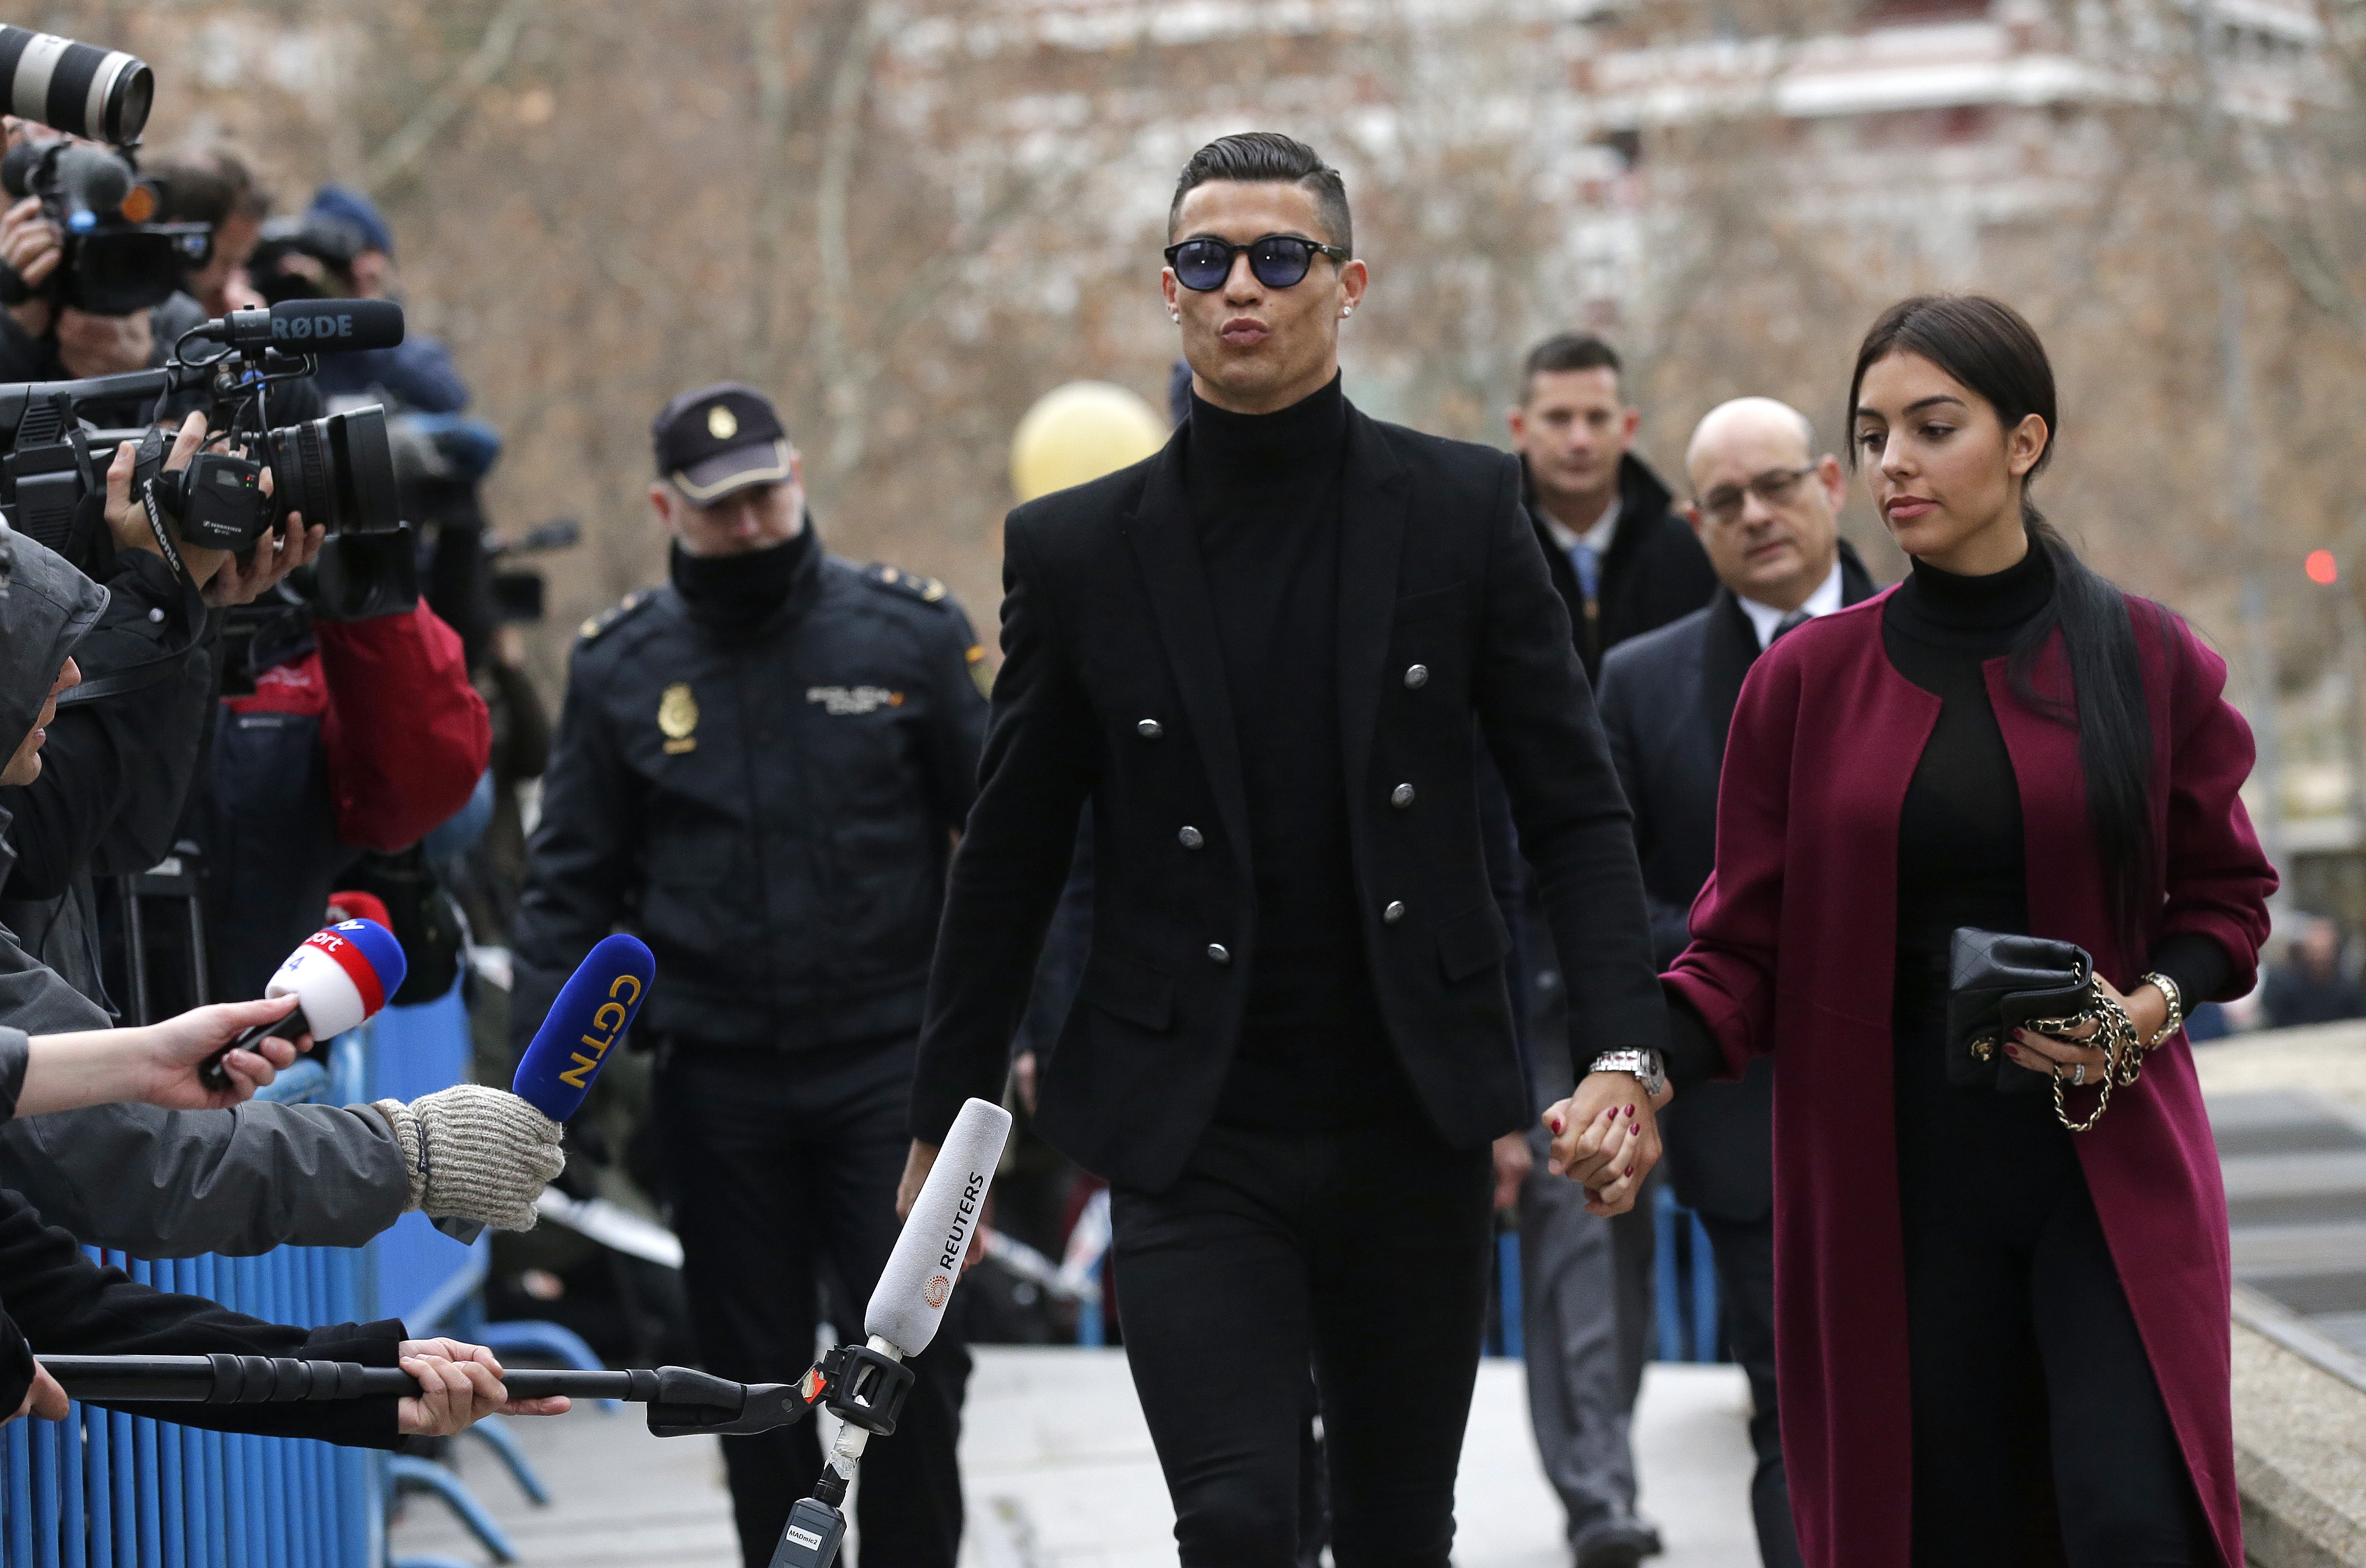 Ronaldo handed 23-month prison sentence, fined for tax evasion